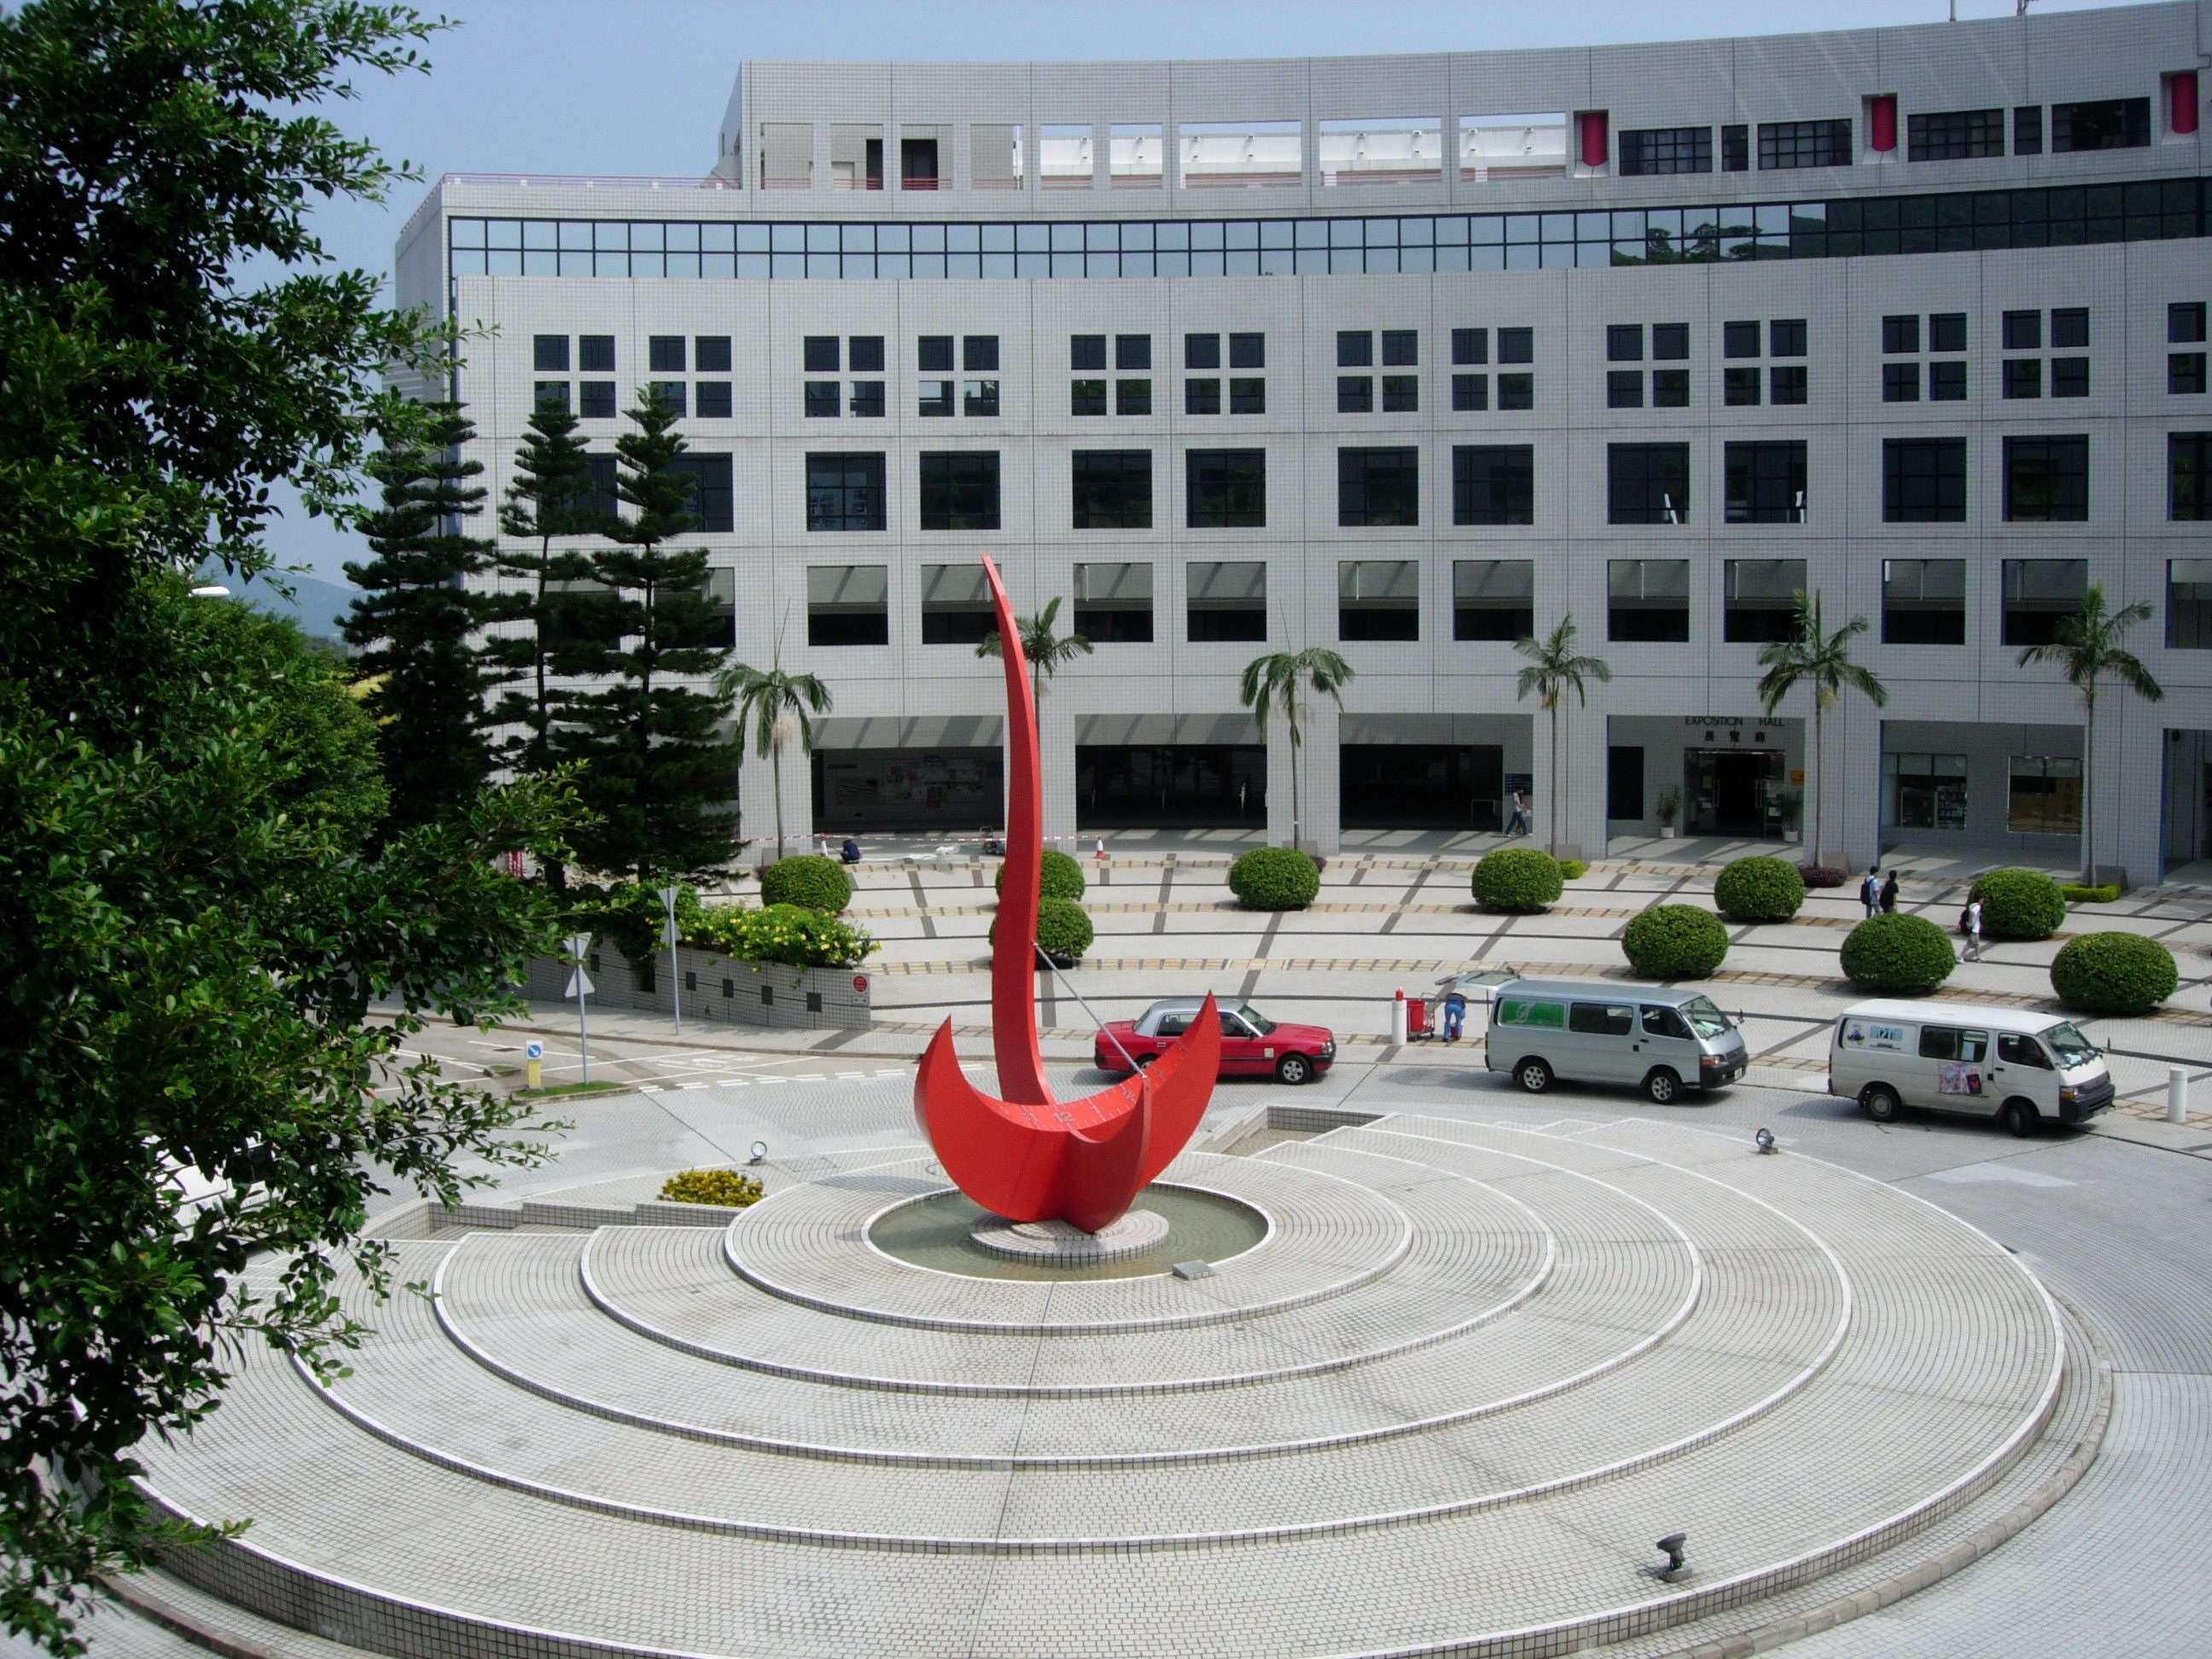 14. The Hong Kong University of Science and Technology Business